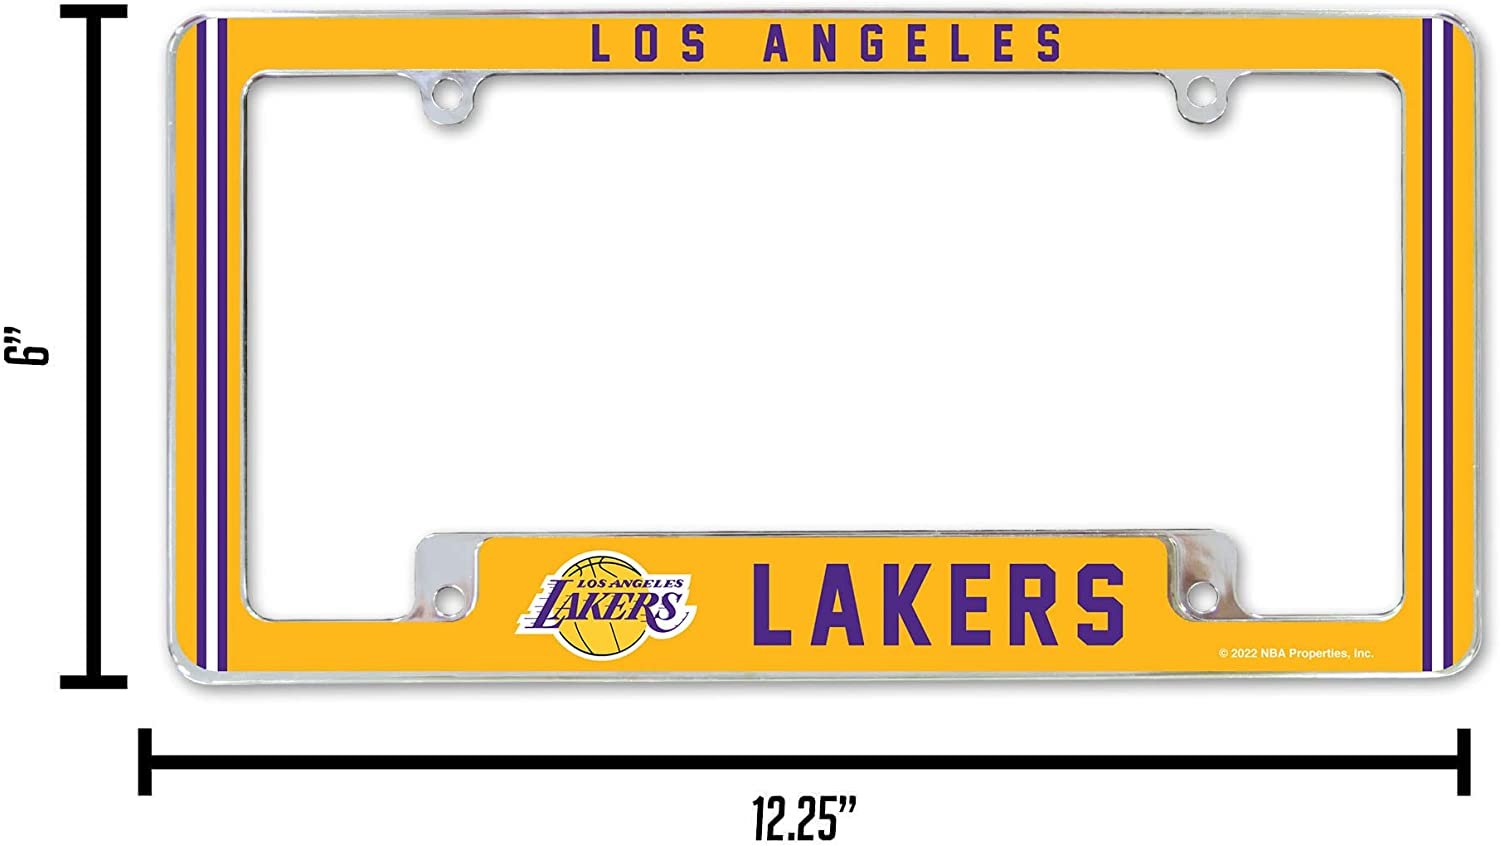 Los Angeles Lakers Metal License Plate Frame Chrome Tag Cover Alternate Design 6x12 Inch